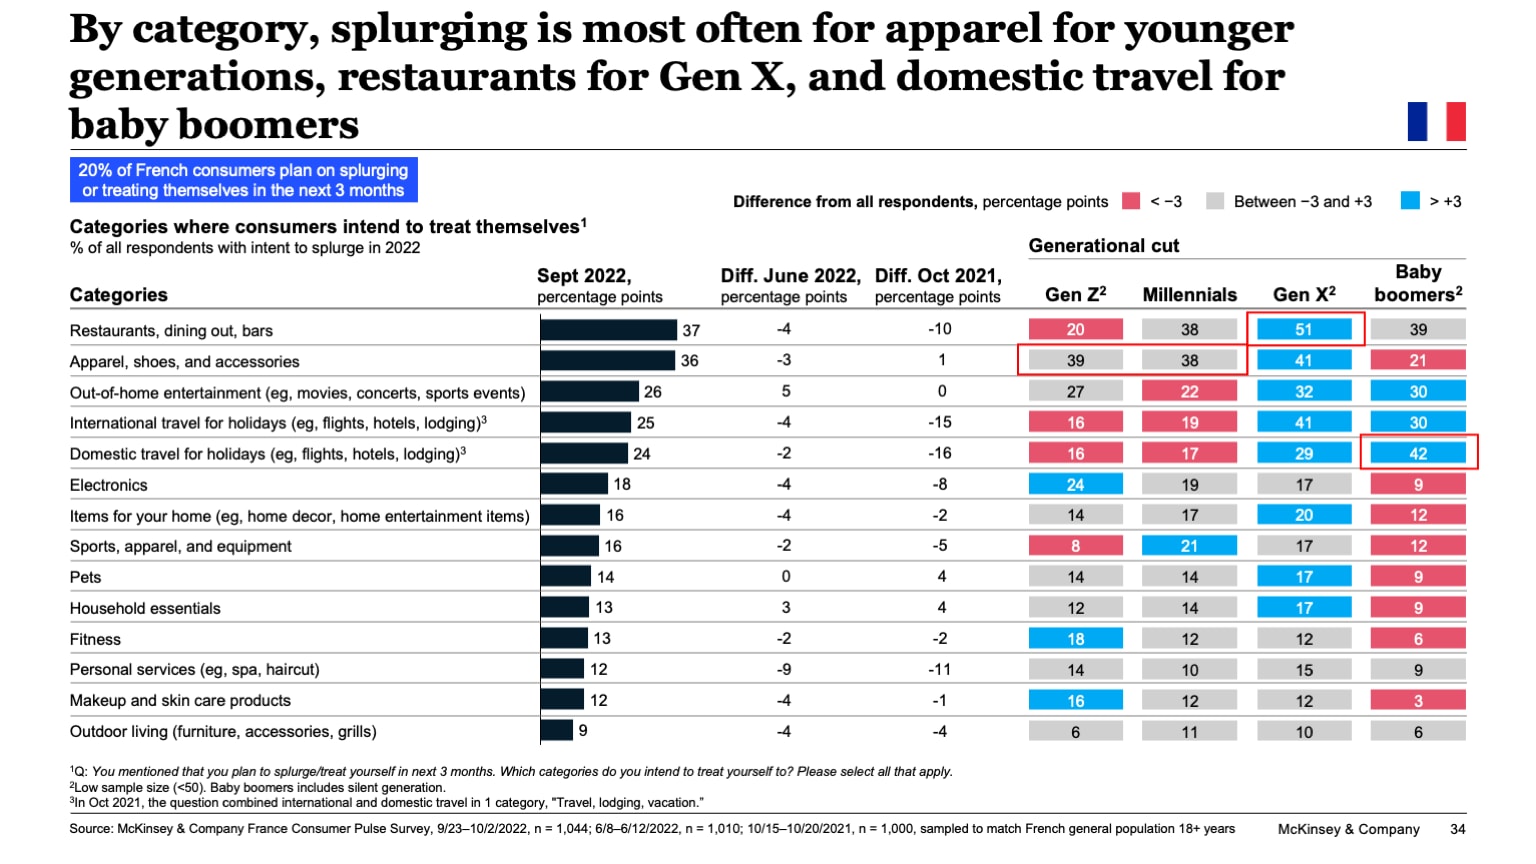 By category, splurging is most often for apparel for younger generations, restaurants for Gen X, and domestic travel for baby boomers